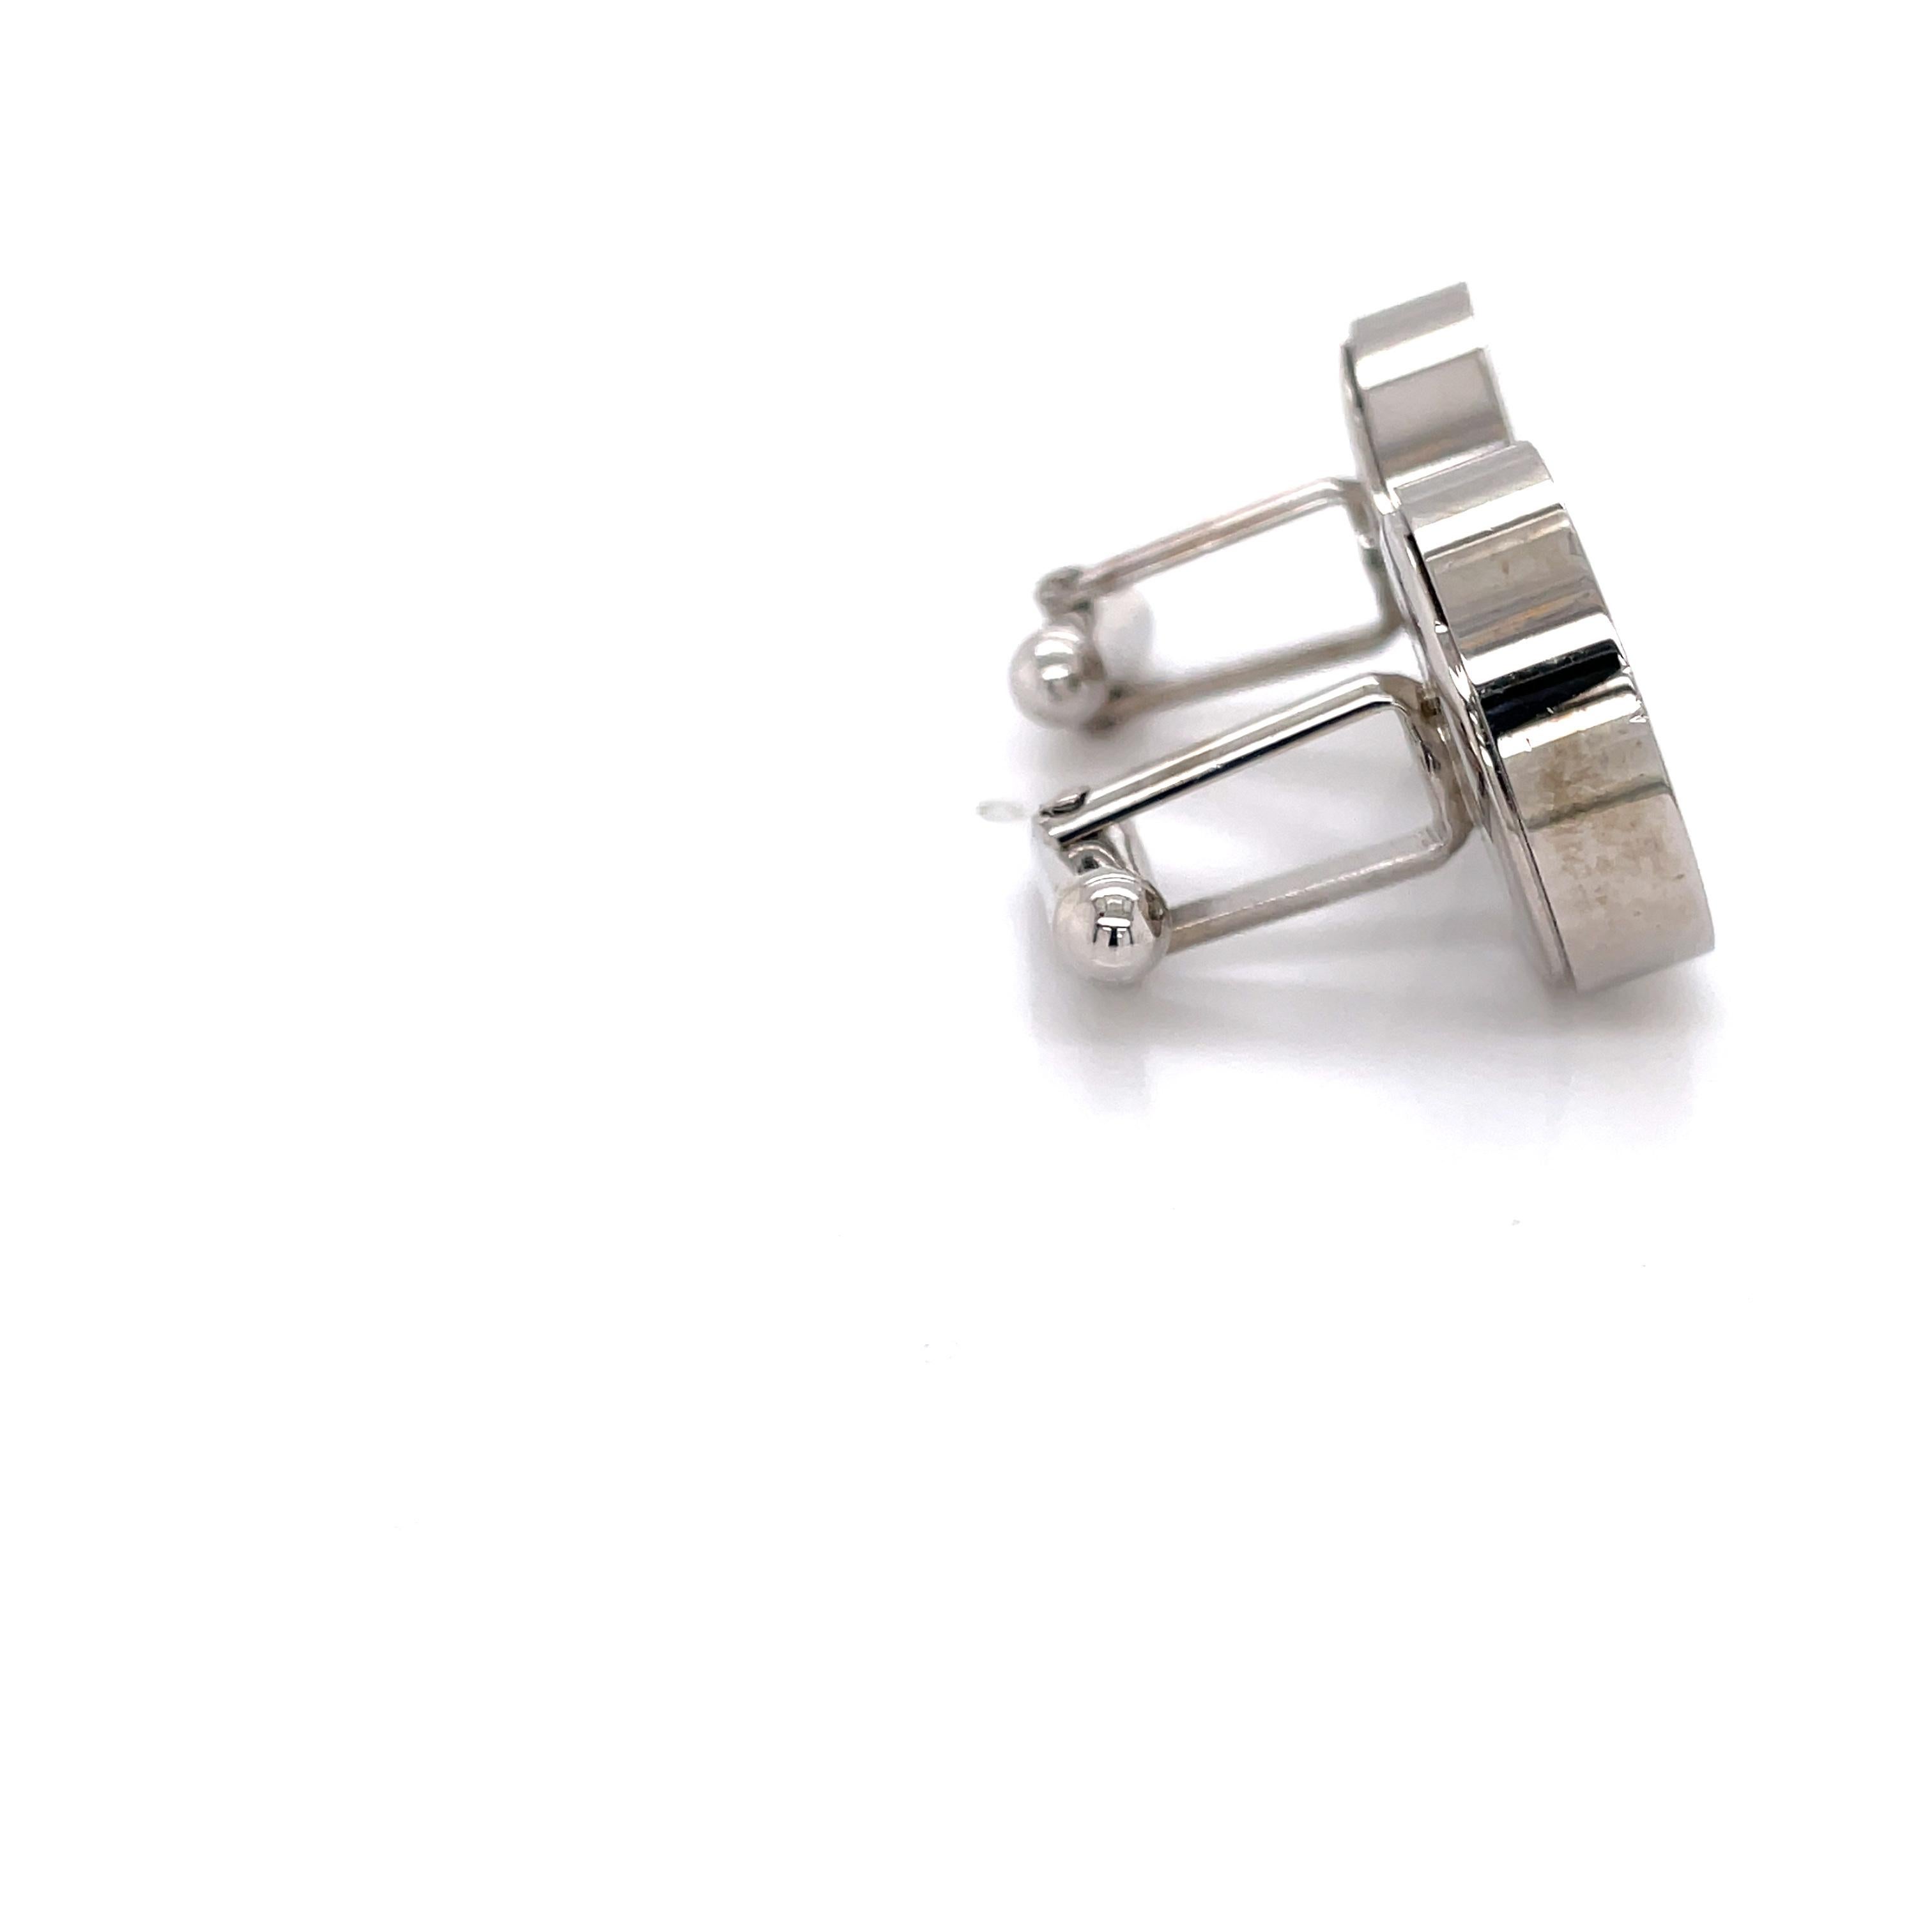 Tateossian London Thermometer Cuff Link Set In Good Condition For Sale In Mount Kisco, NY